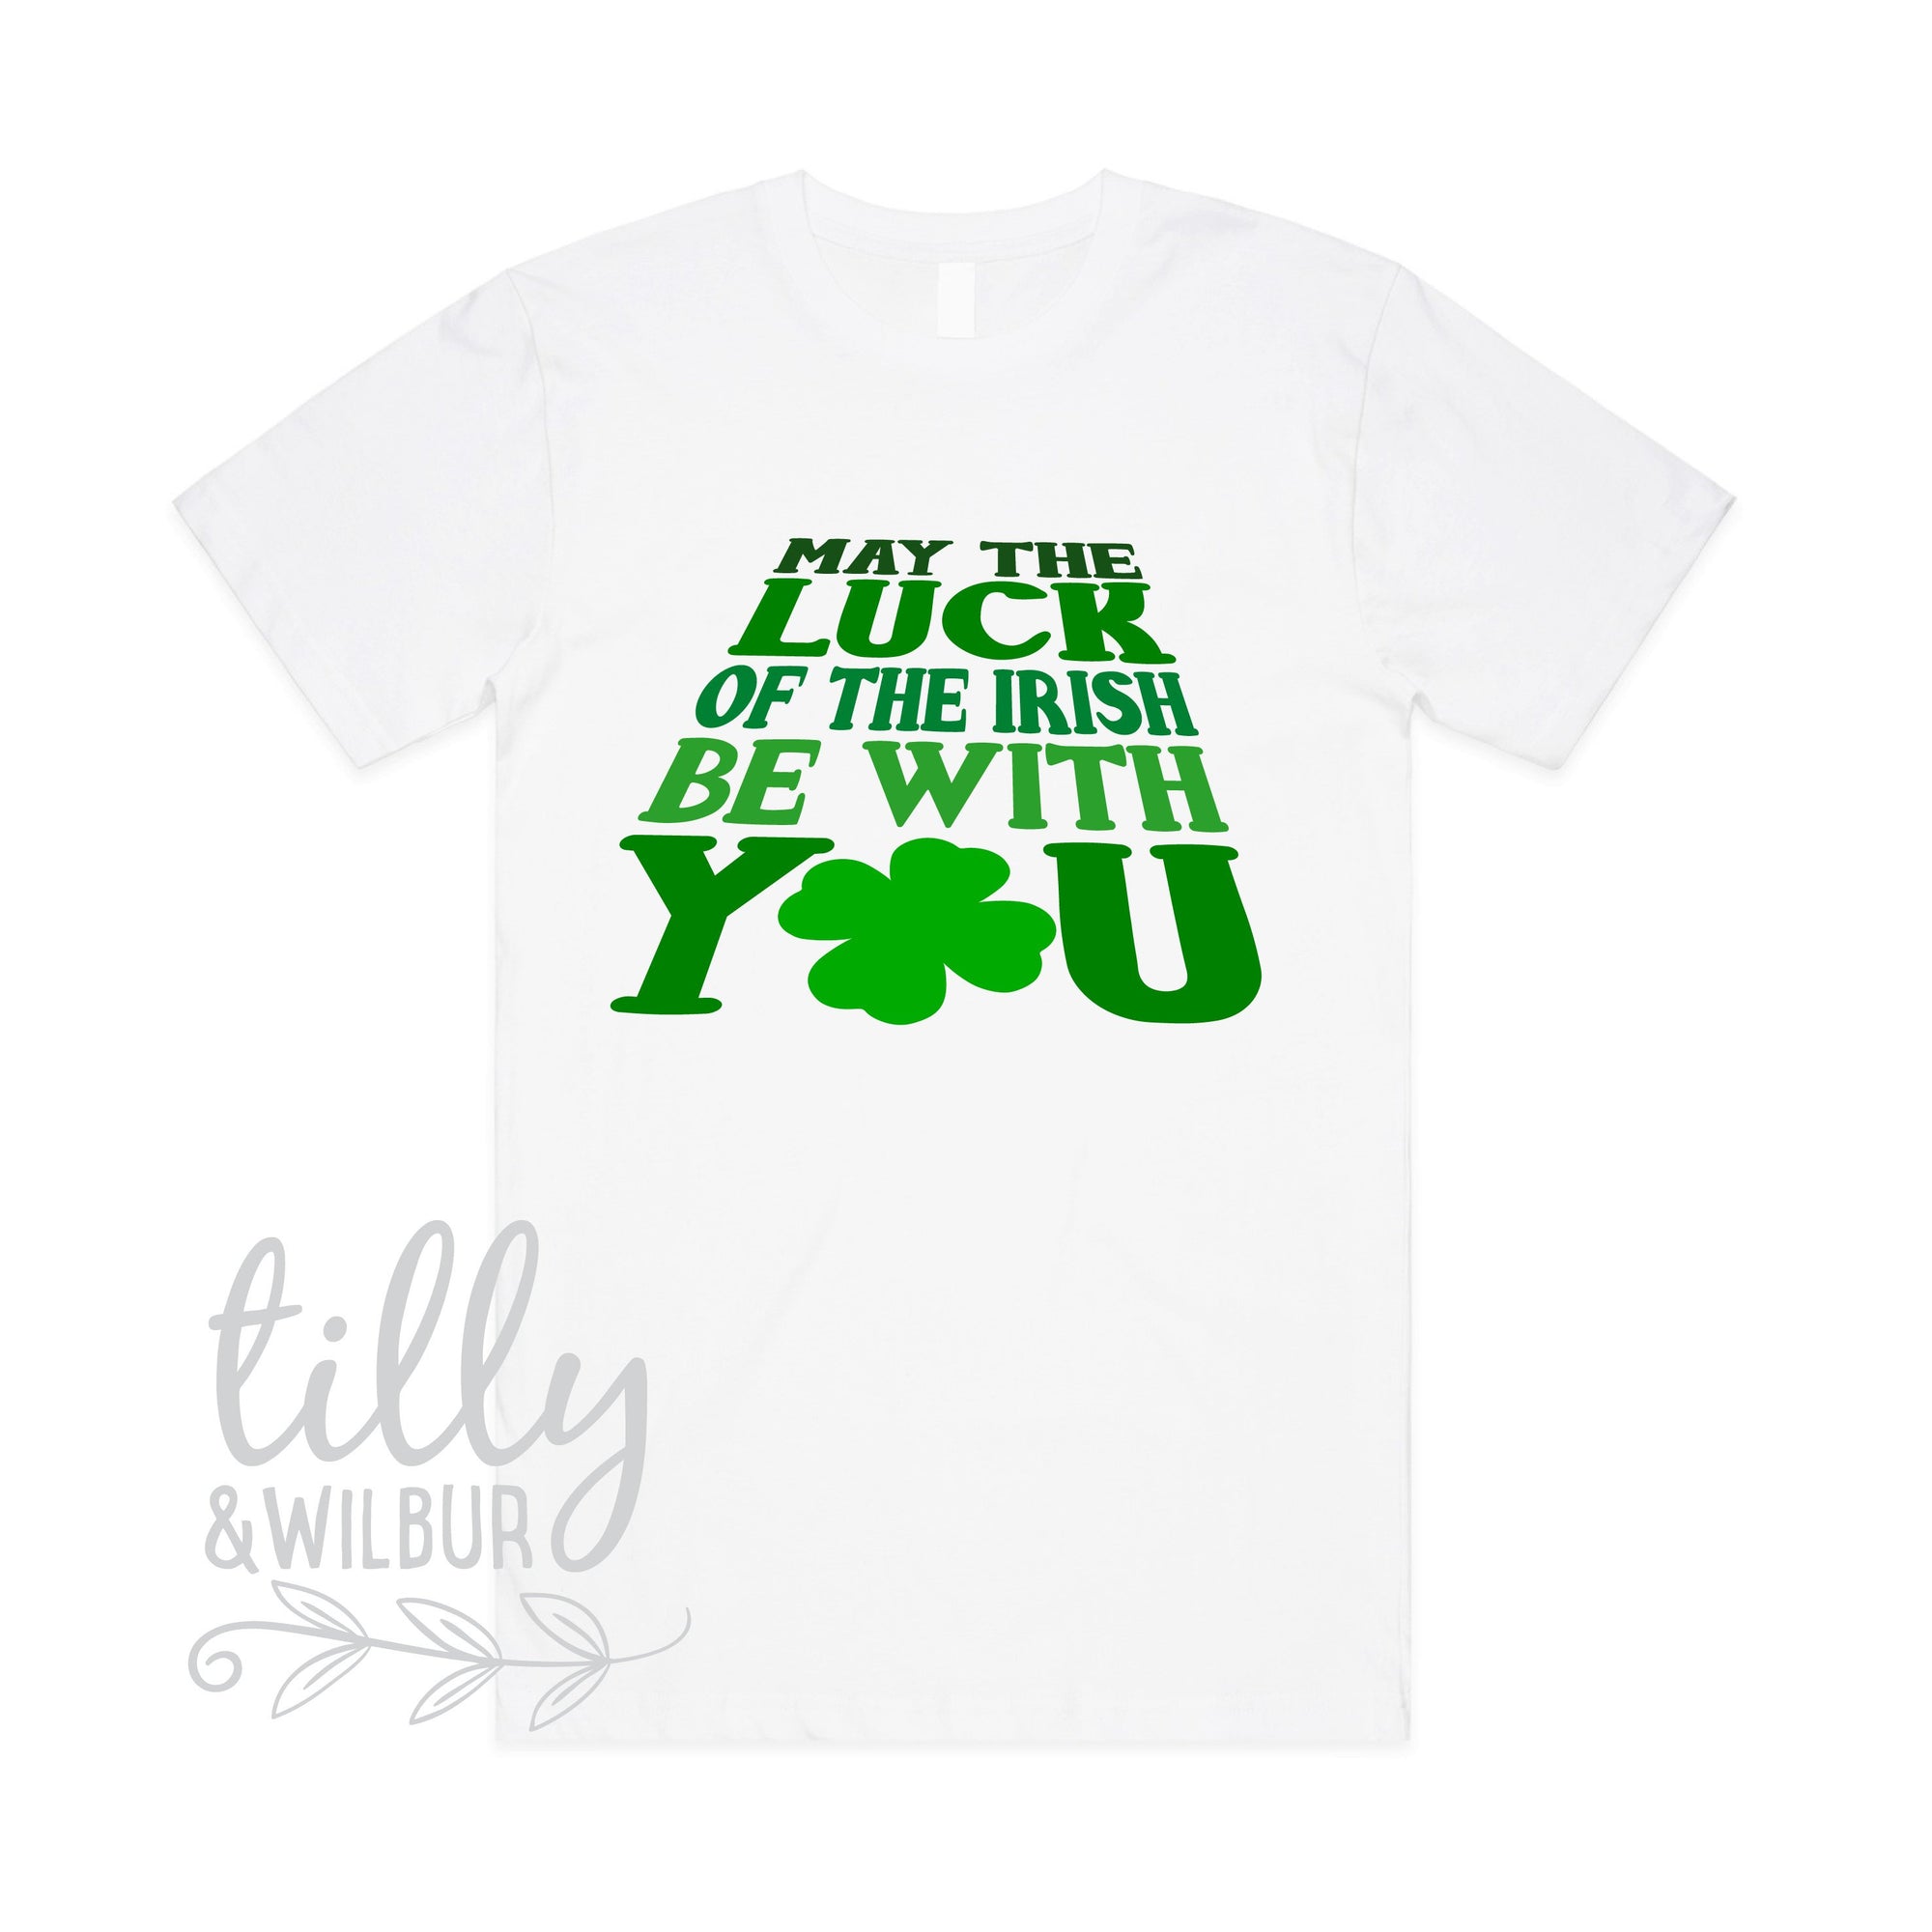 May The Luck Of The Irish Be With You Mens T-Shirt, St Patrick's Day Shirt, Happy St Paddy's Day, Ireland, Celtic, St Patrick, Paddy Shirt